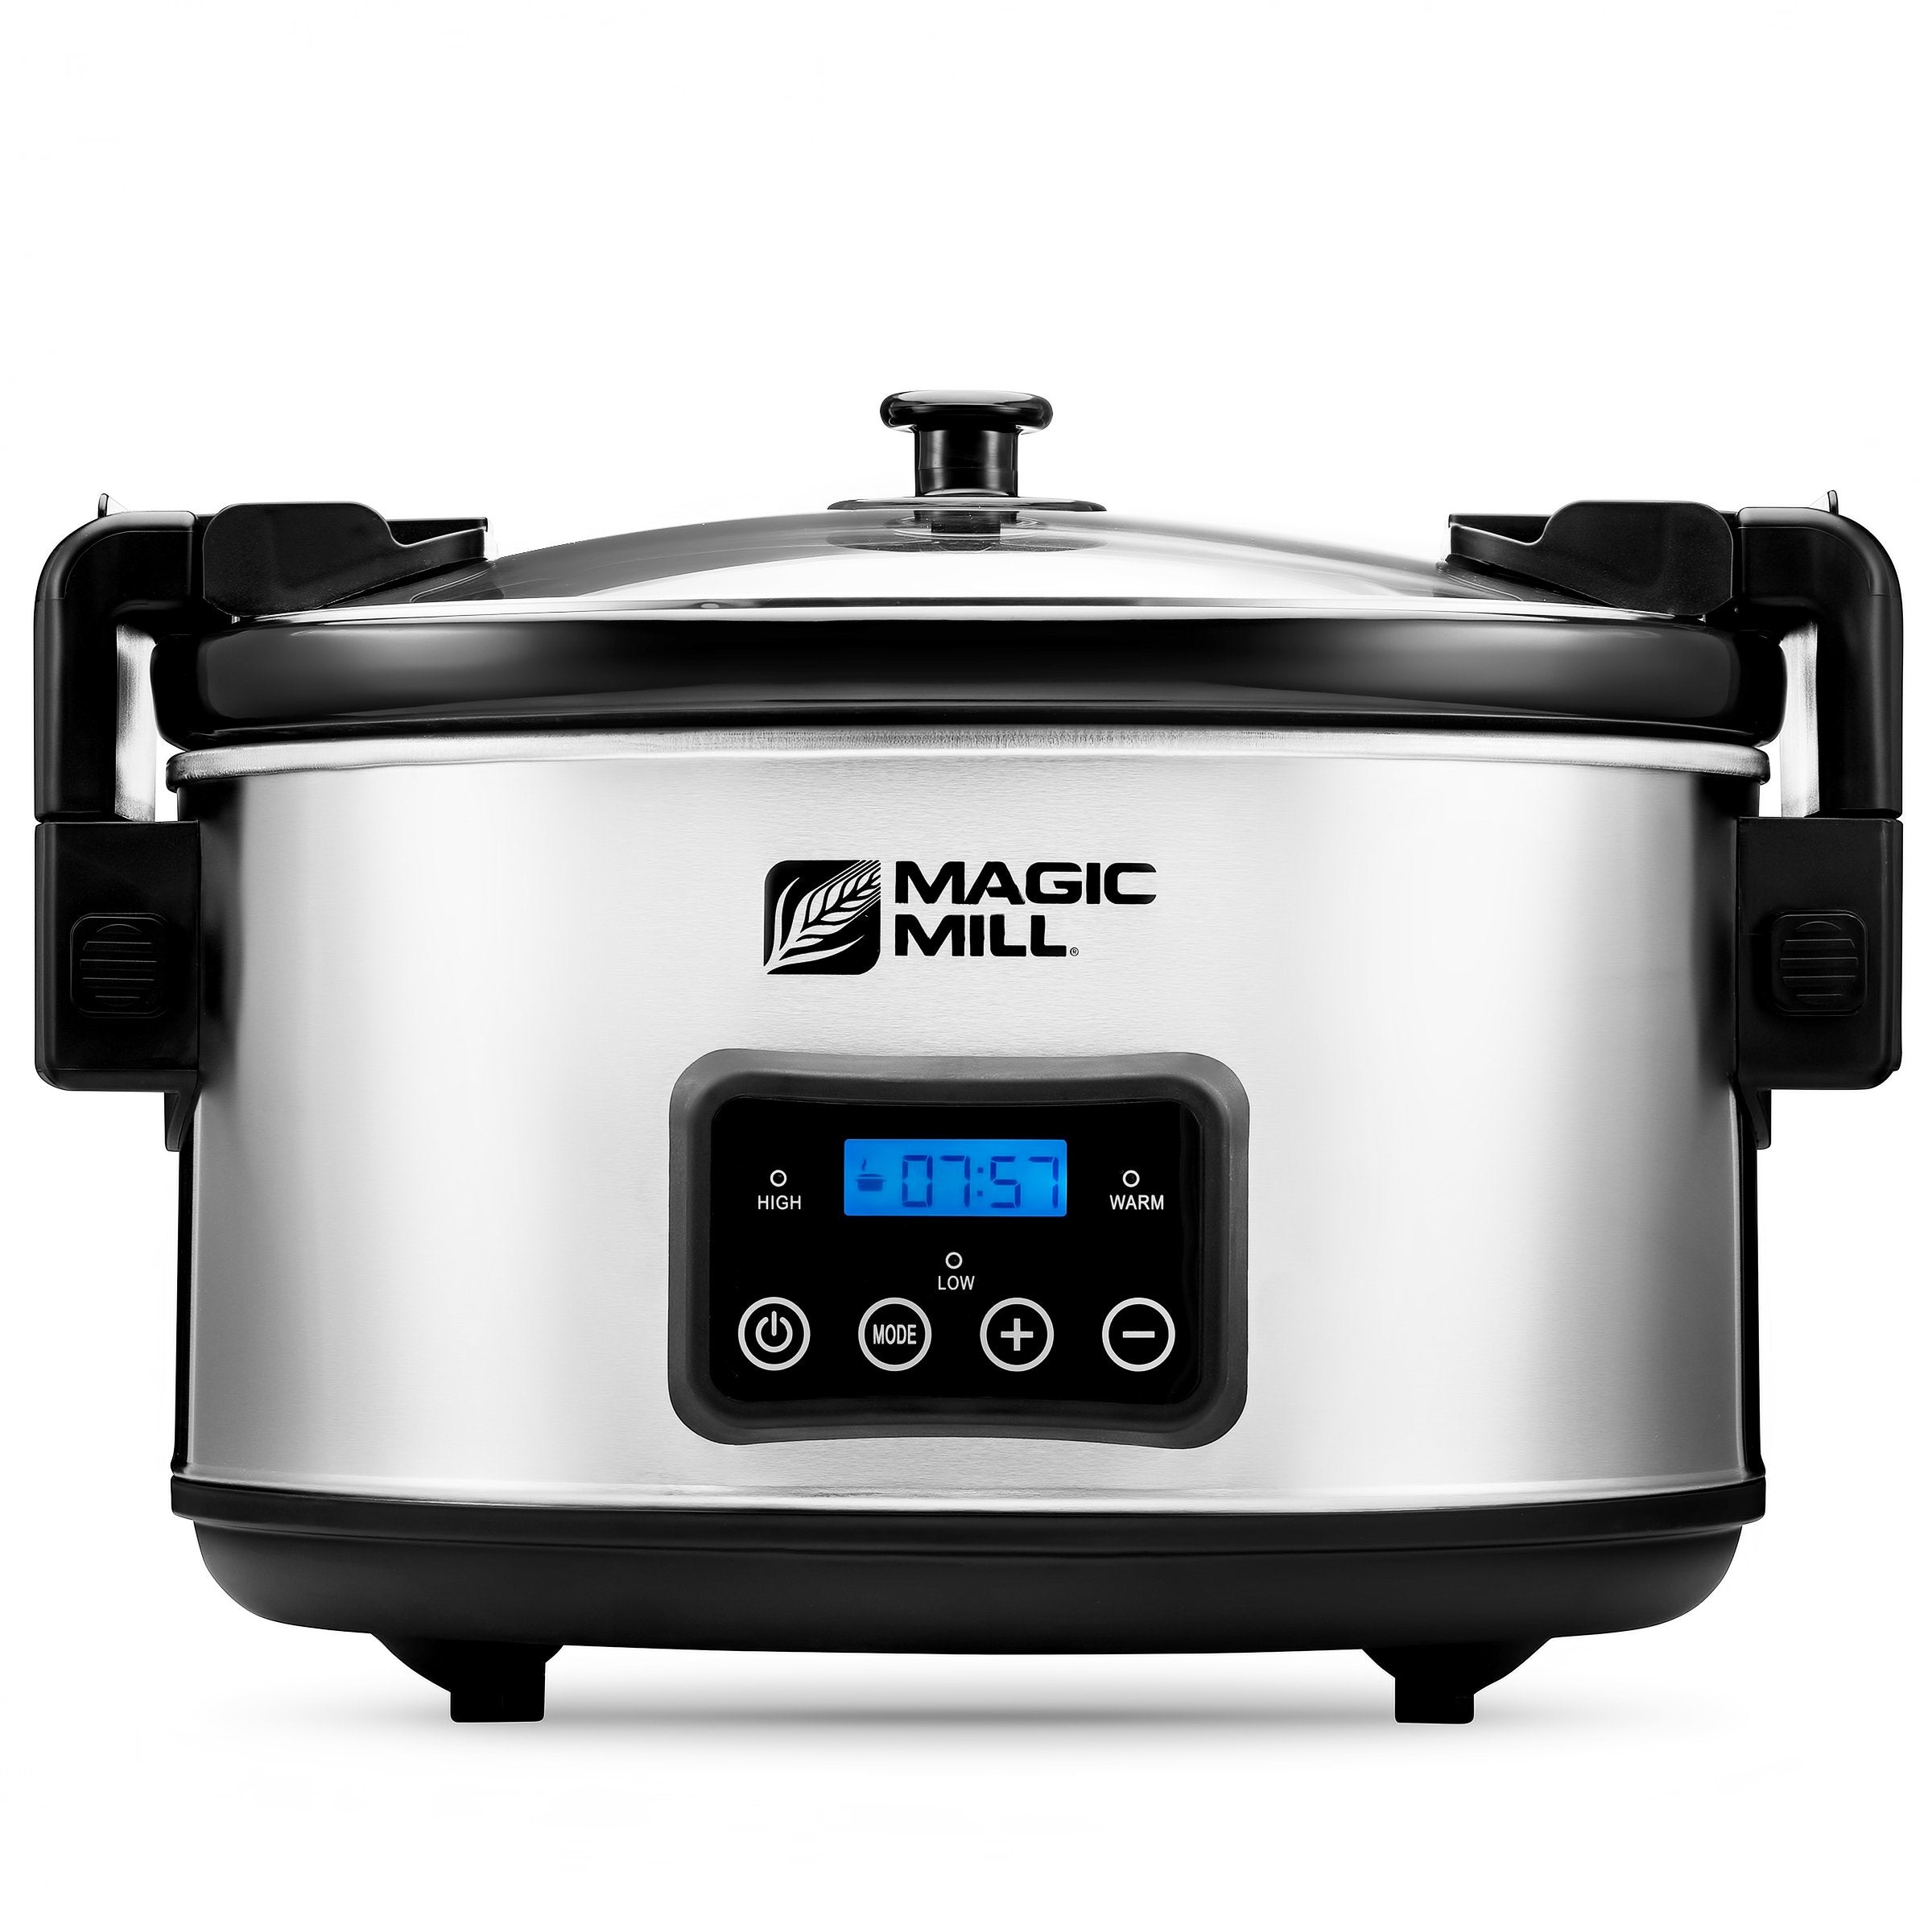 Magic Mill Slow Cooker  Slow cooker, Cooker, Large slow cooker